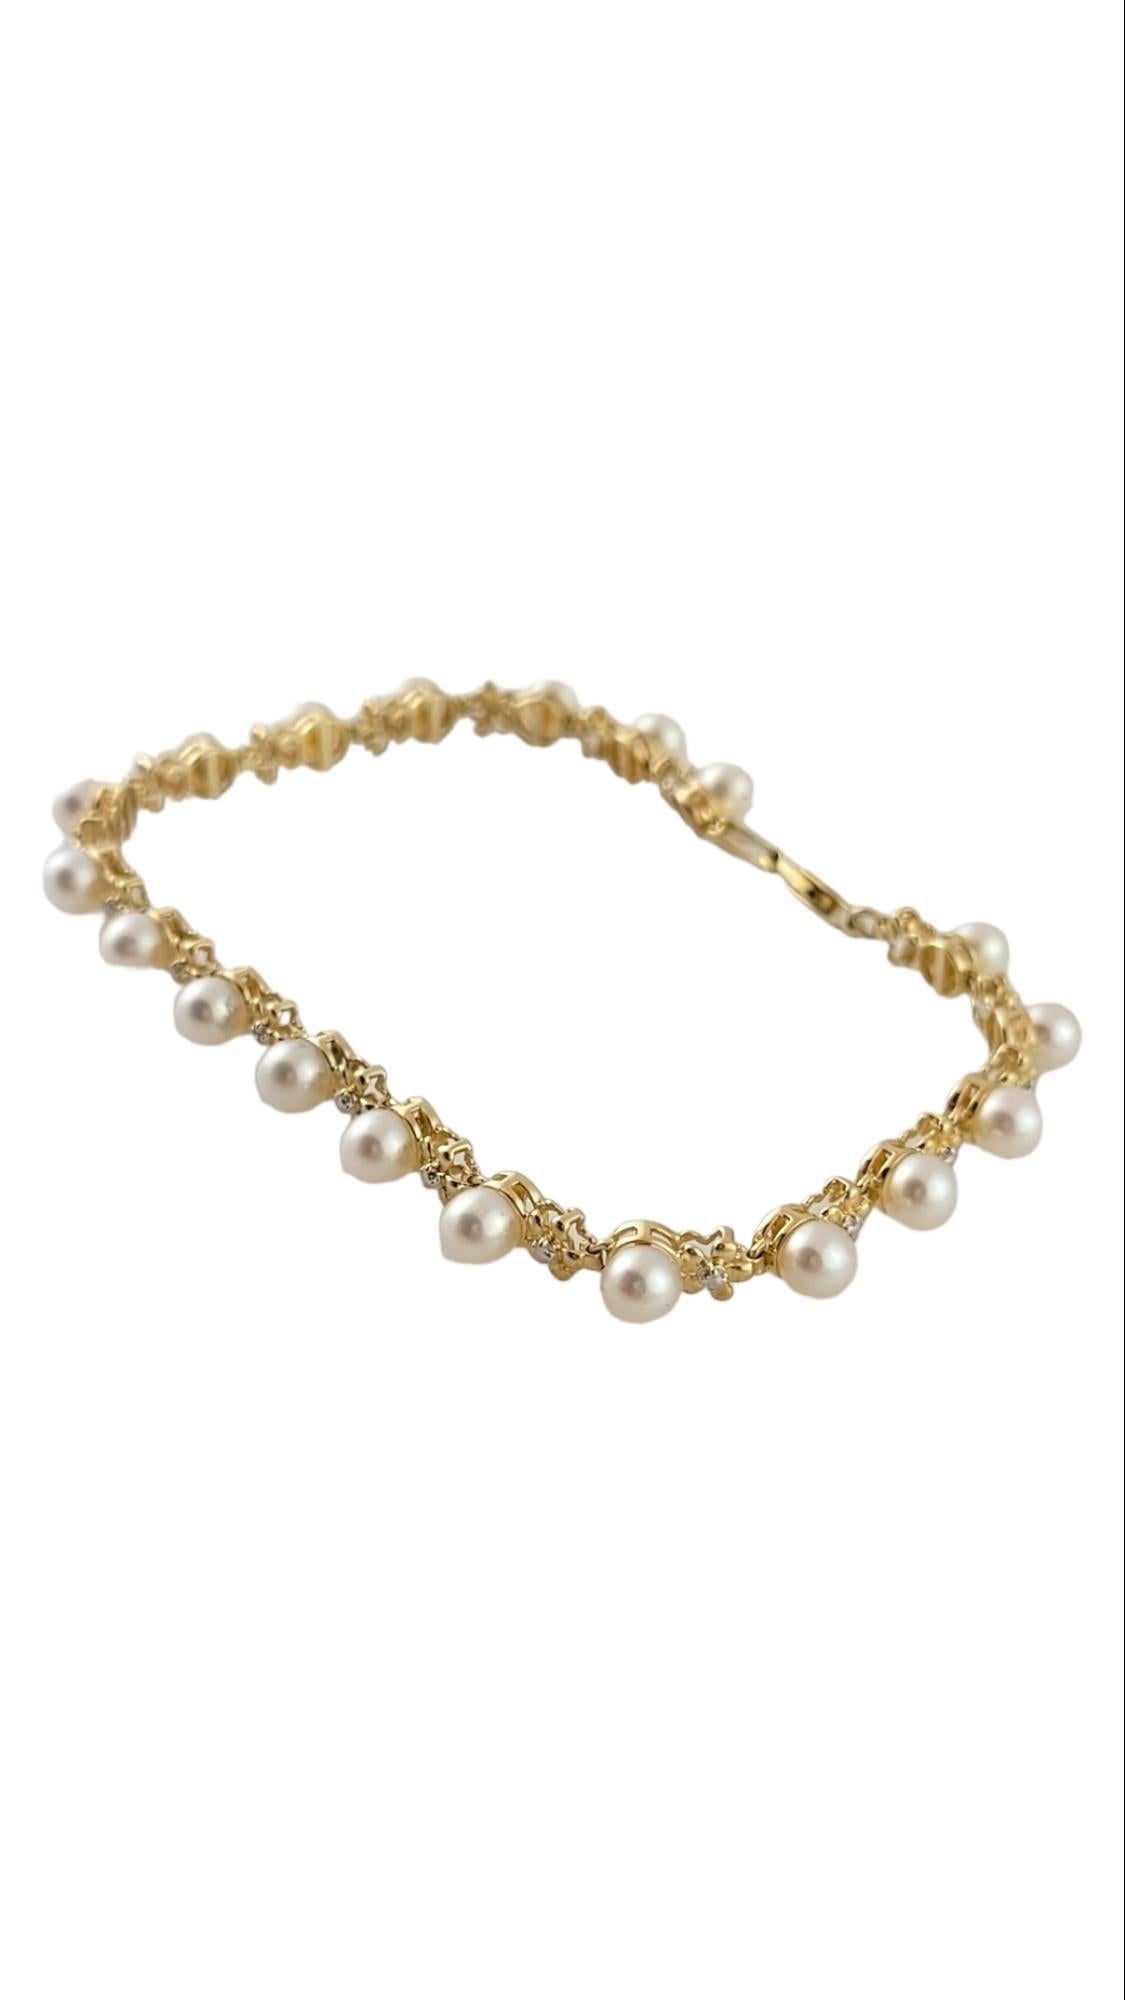 14K Yellow Gold Pearl Tennis Bracelet

This gorgeous tennis bracelet is crafted from 14K yellow gold and features 19 beautiful pearls!

Pearls approximately 4.4mm each 

Bracelet size: 7